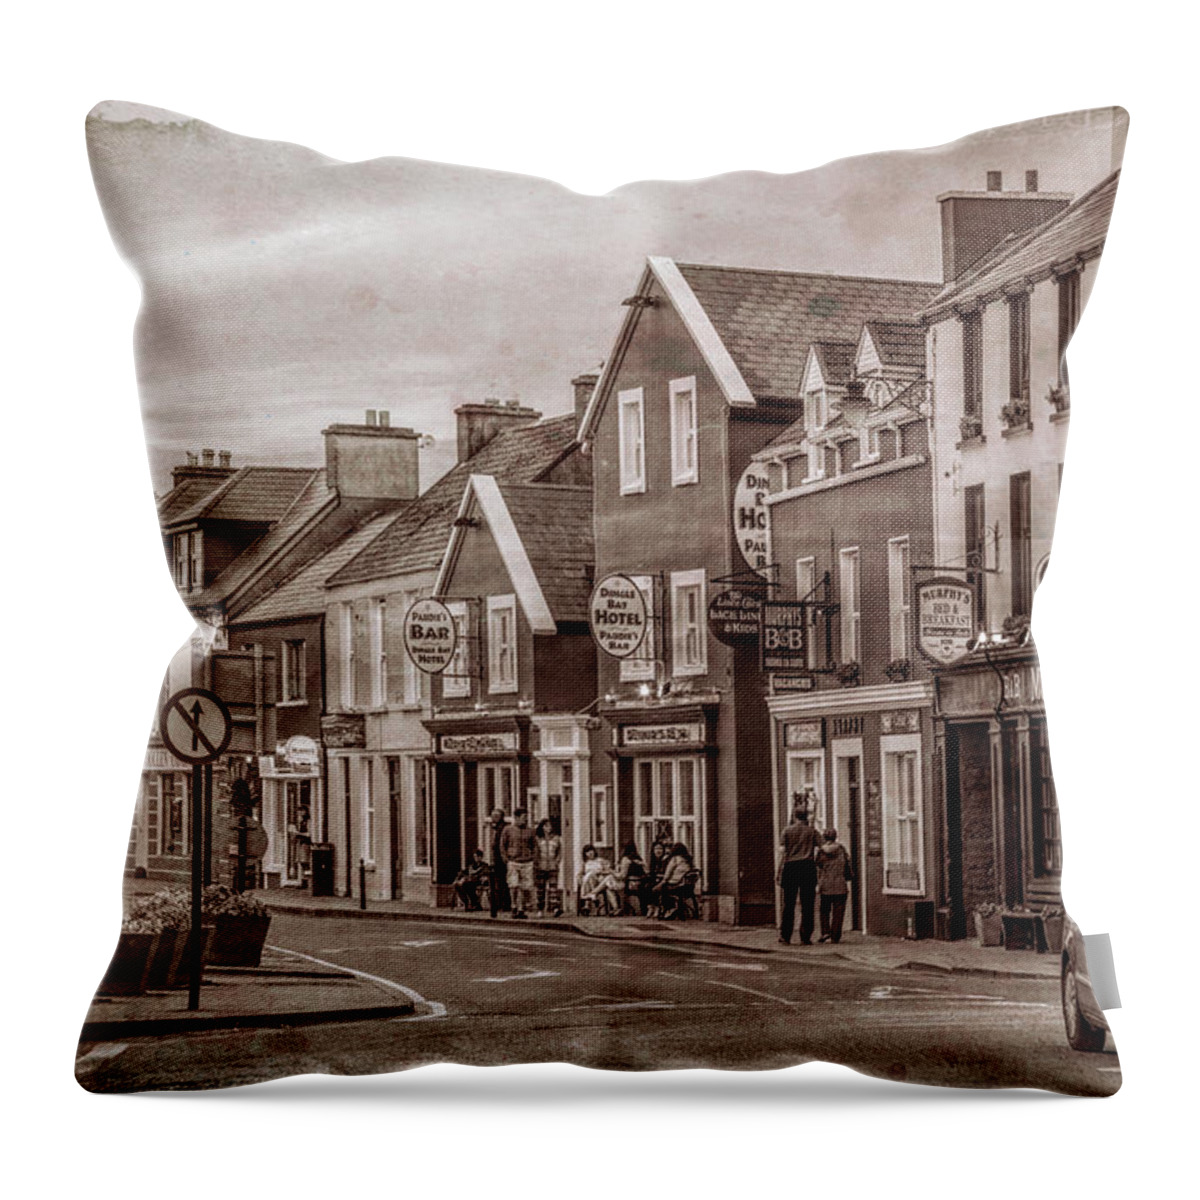 Barns Throw Pillow featuring the photograph Old Irish Downtown The Dingle Peninsula in Vintage Sepia by Debra and Dave Vanderlaan